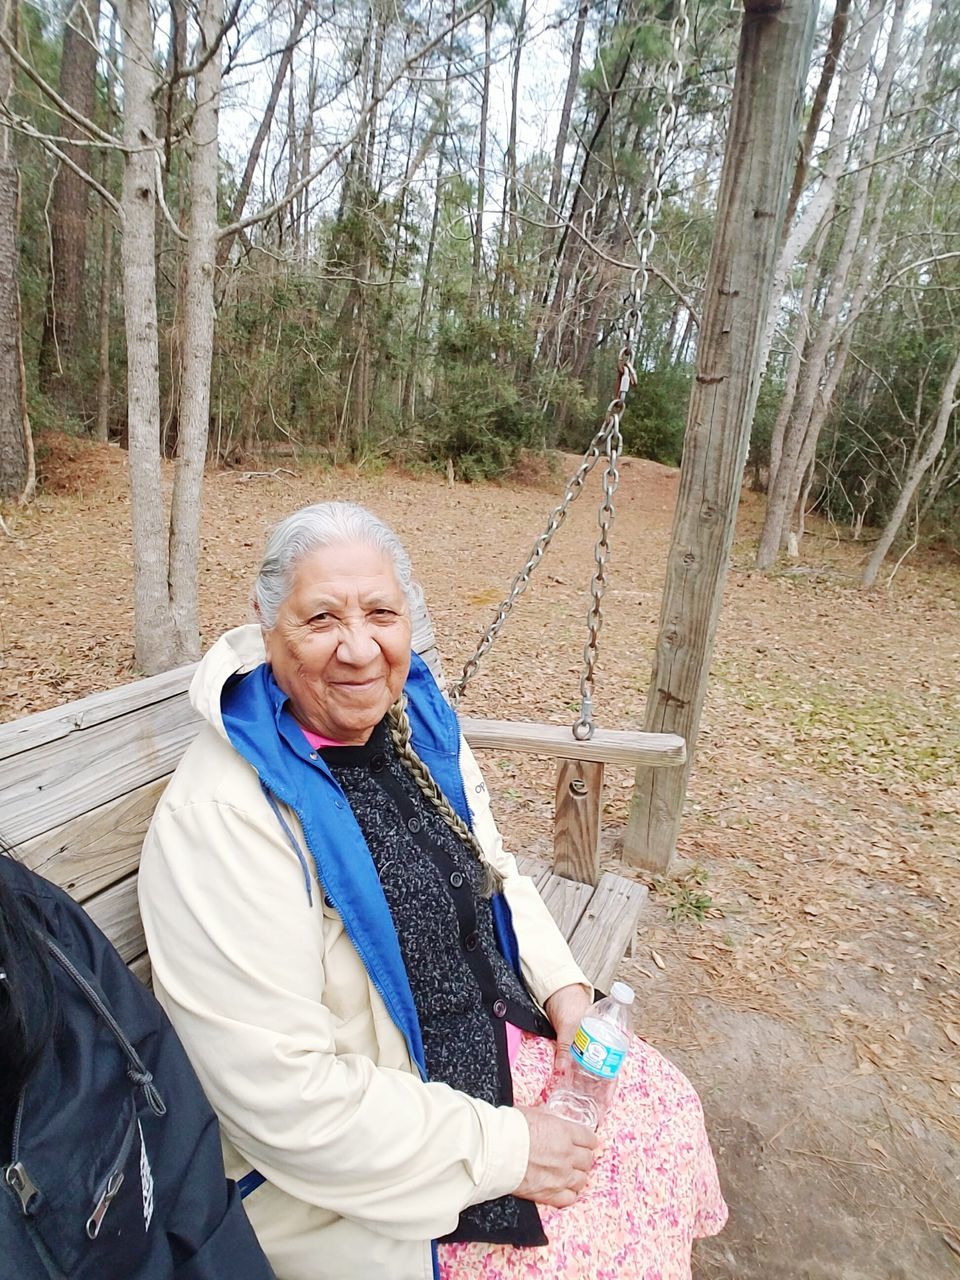 senior adult, portrait, waist up, smiling, looking at camera, white hair, senior women, happiness, gray hair, leisure activity, one person, senior men, adults only, one senior man only, people, retirement, outdoors, adult, one man only, grandparent, tree, day, only men